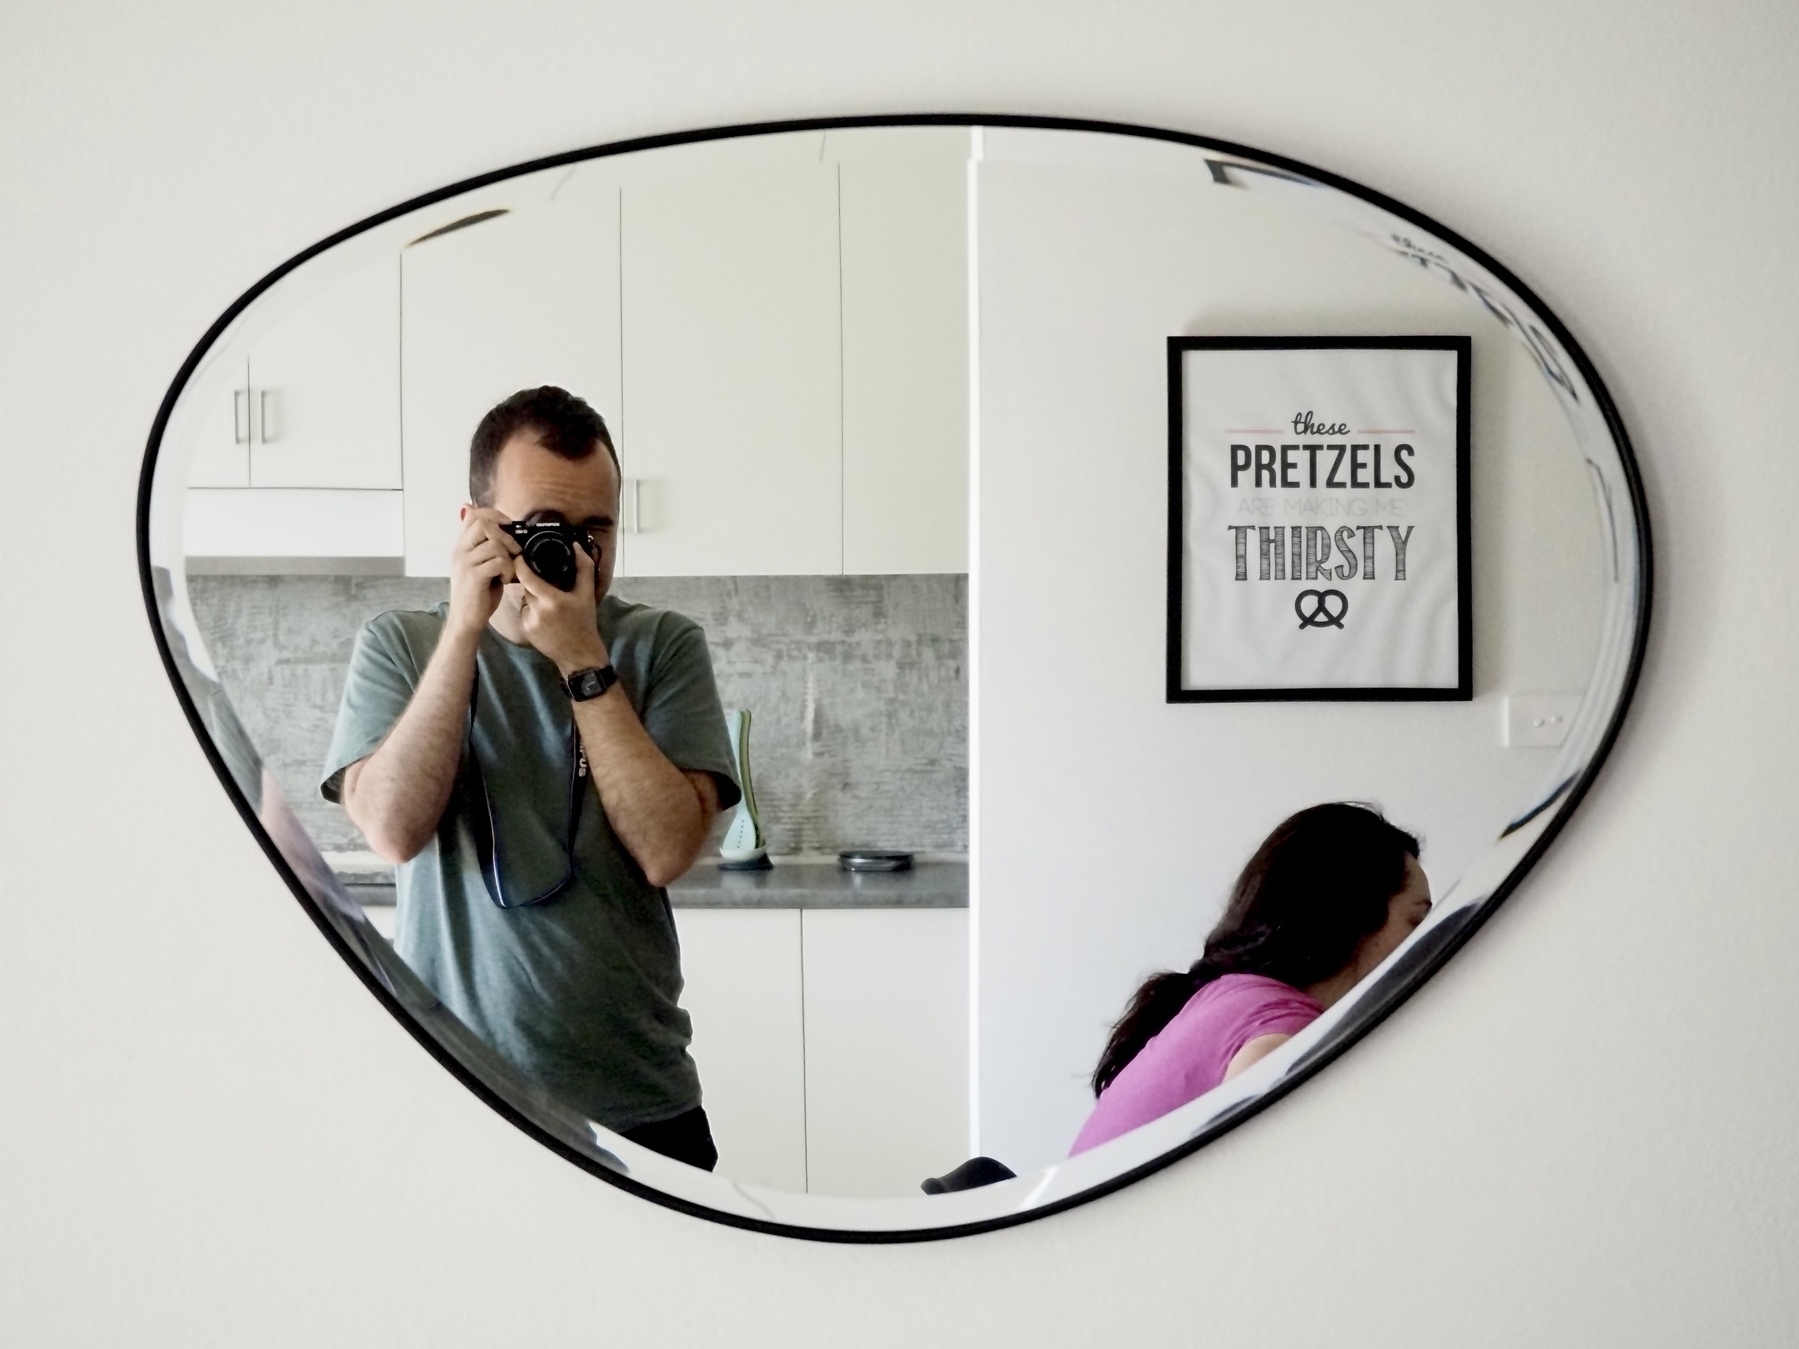 A man photographs himself and a woman in an oddly-shaped mirror with a kitchen bench in the background, along with a framed print that says 'These pretzels are making me thirsty'.